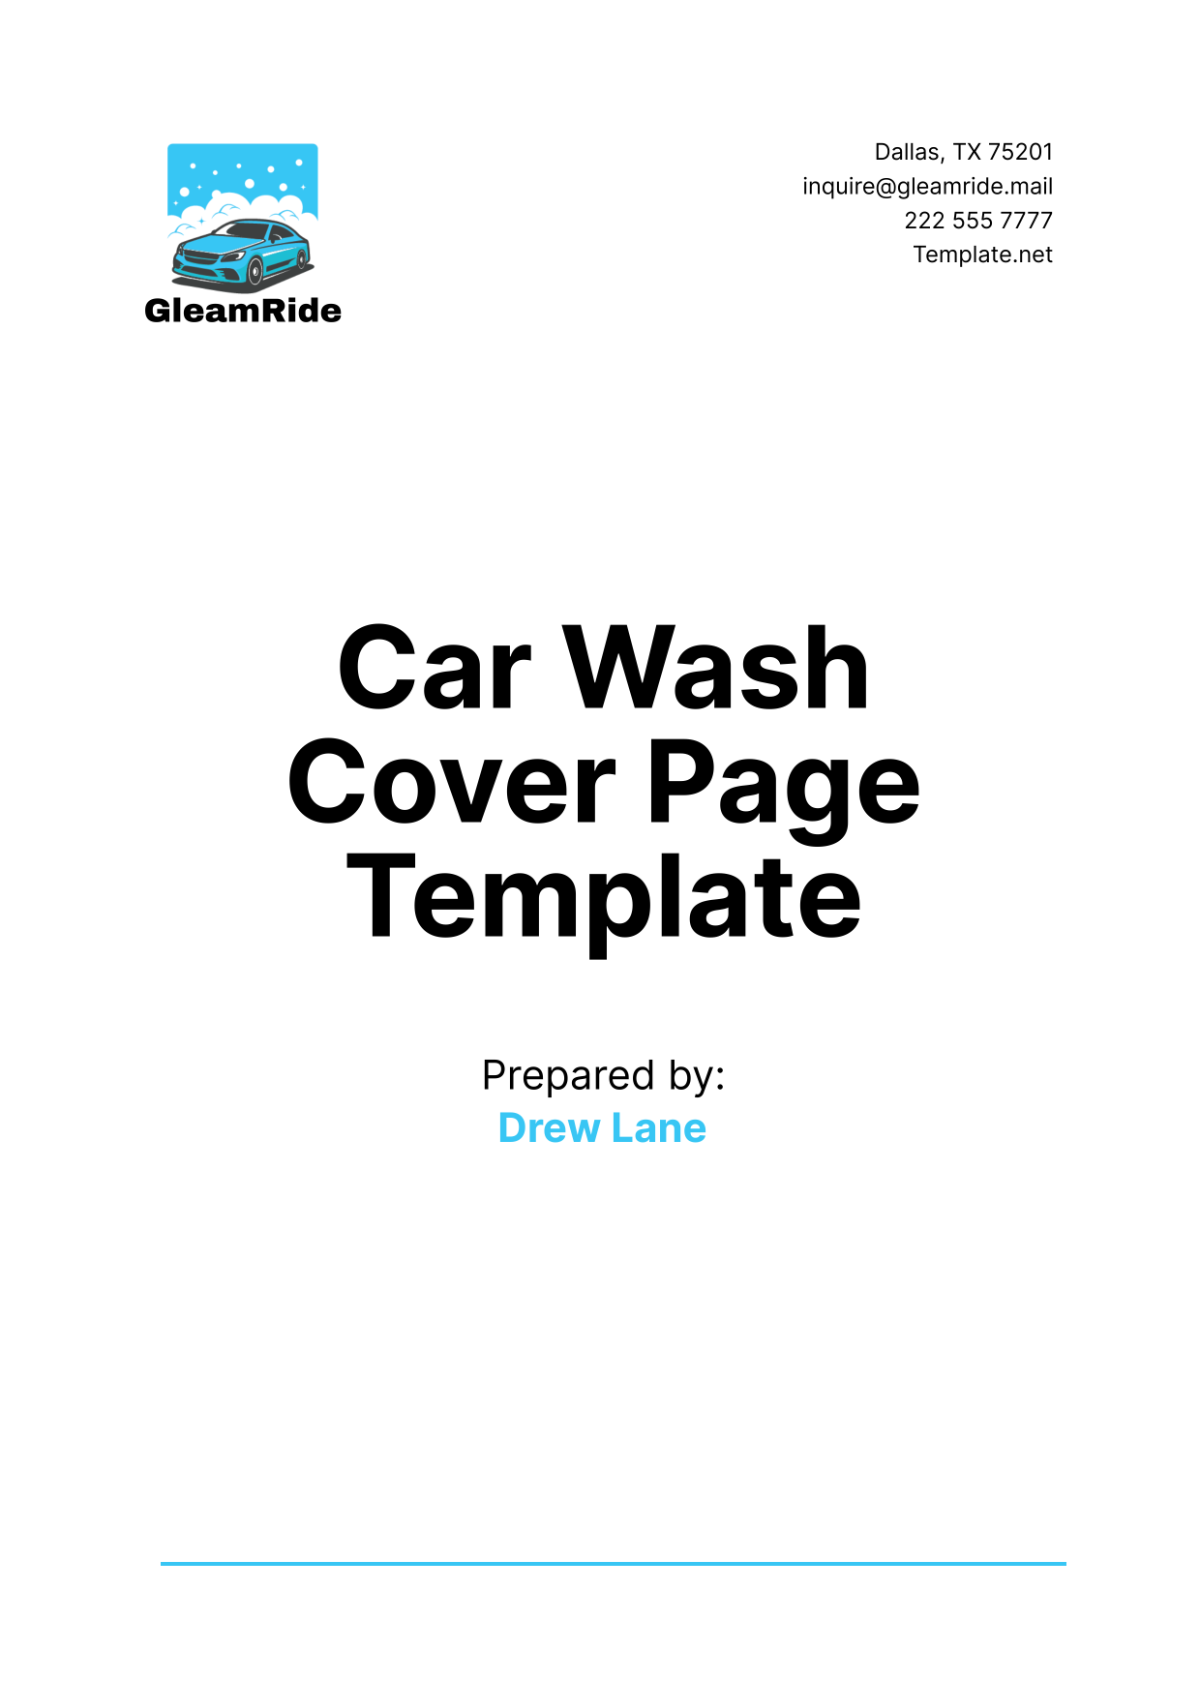 Car Wash Cover Page